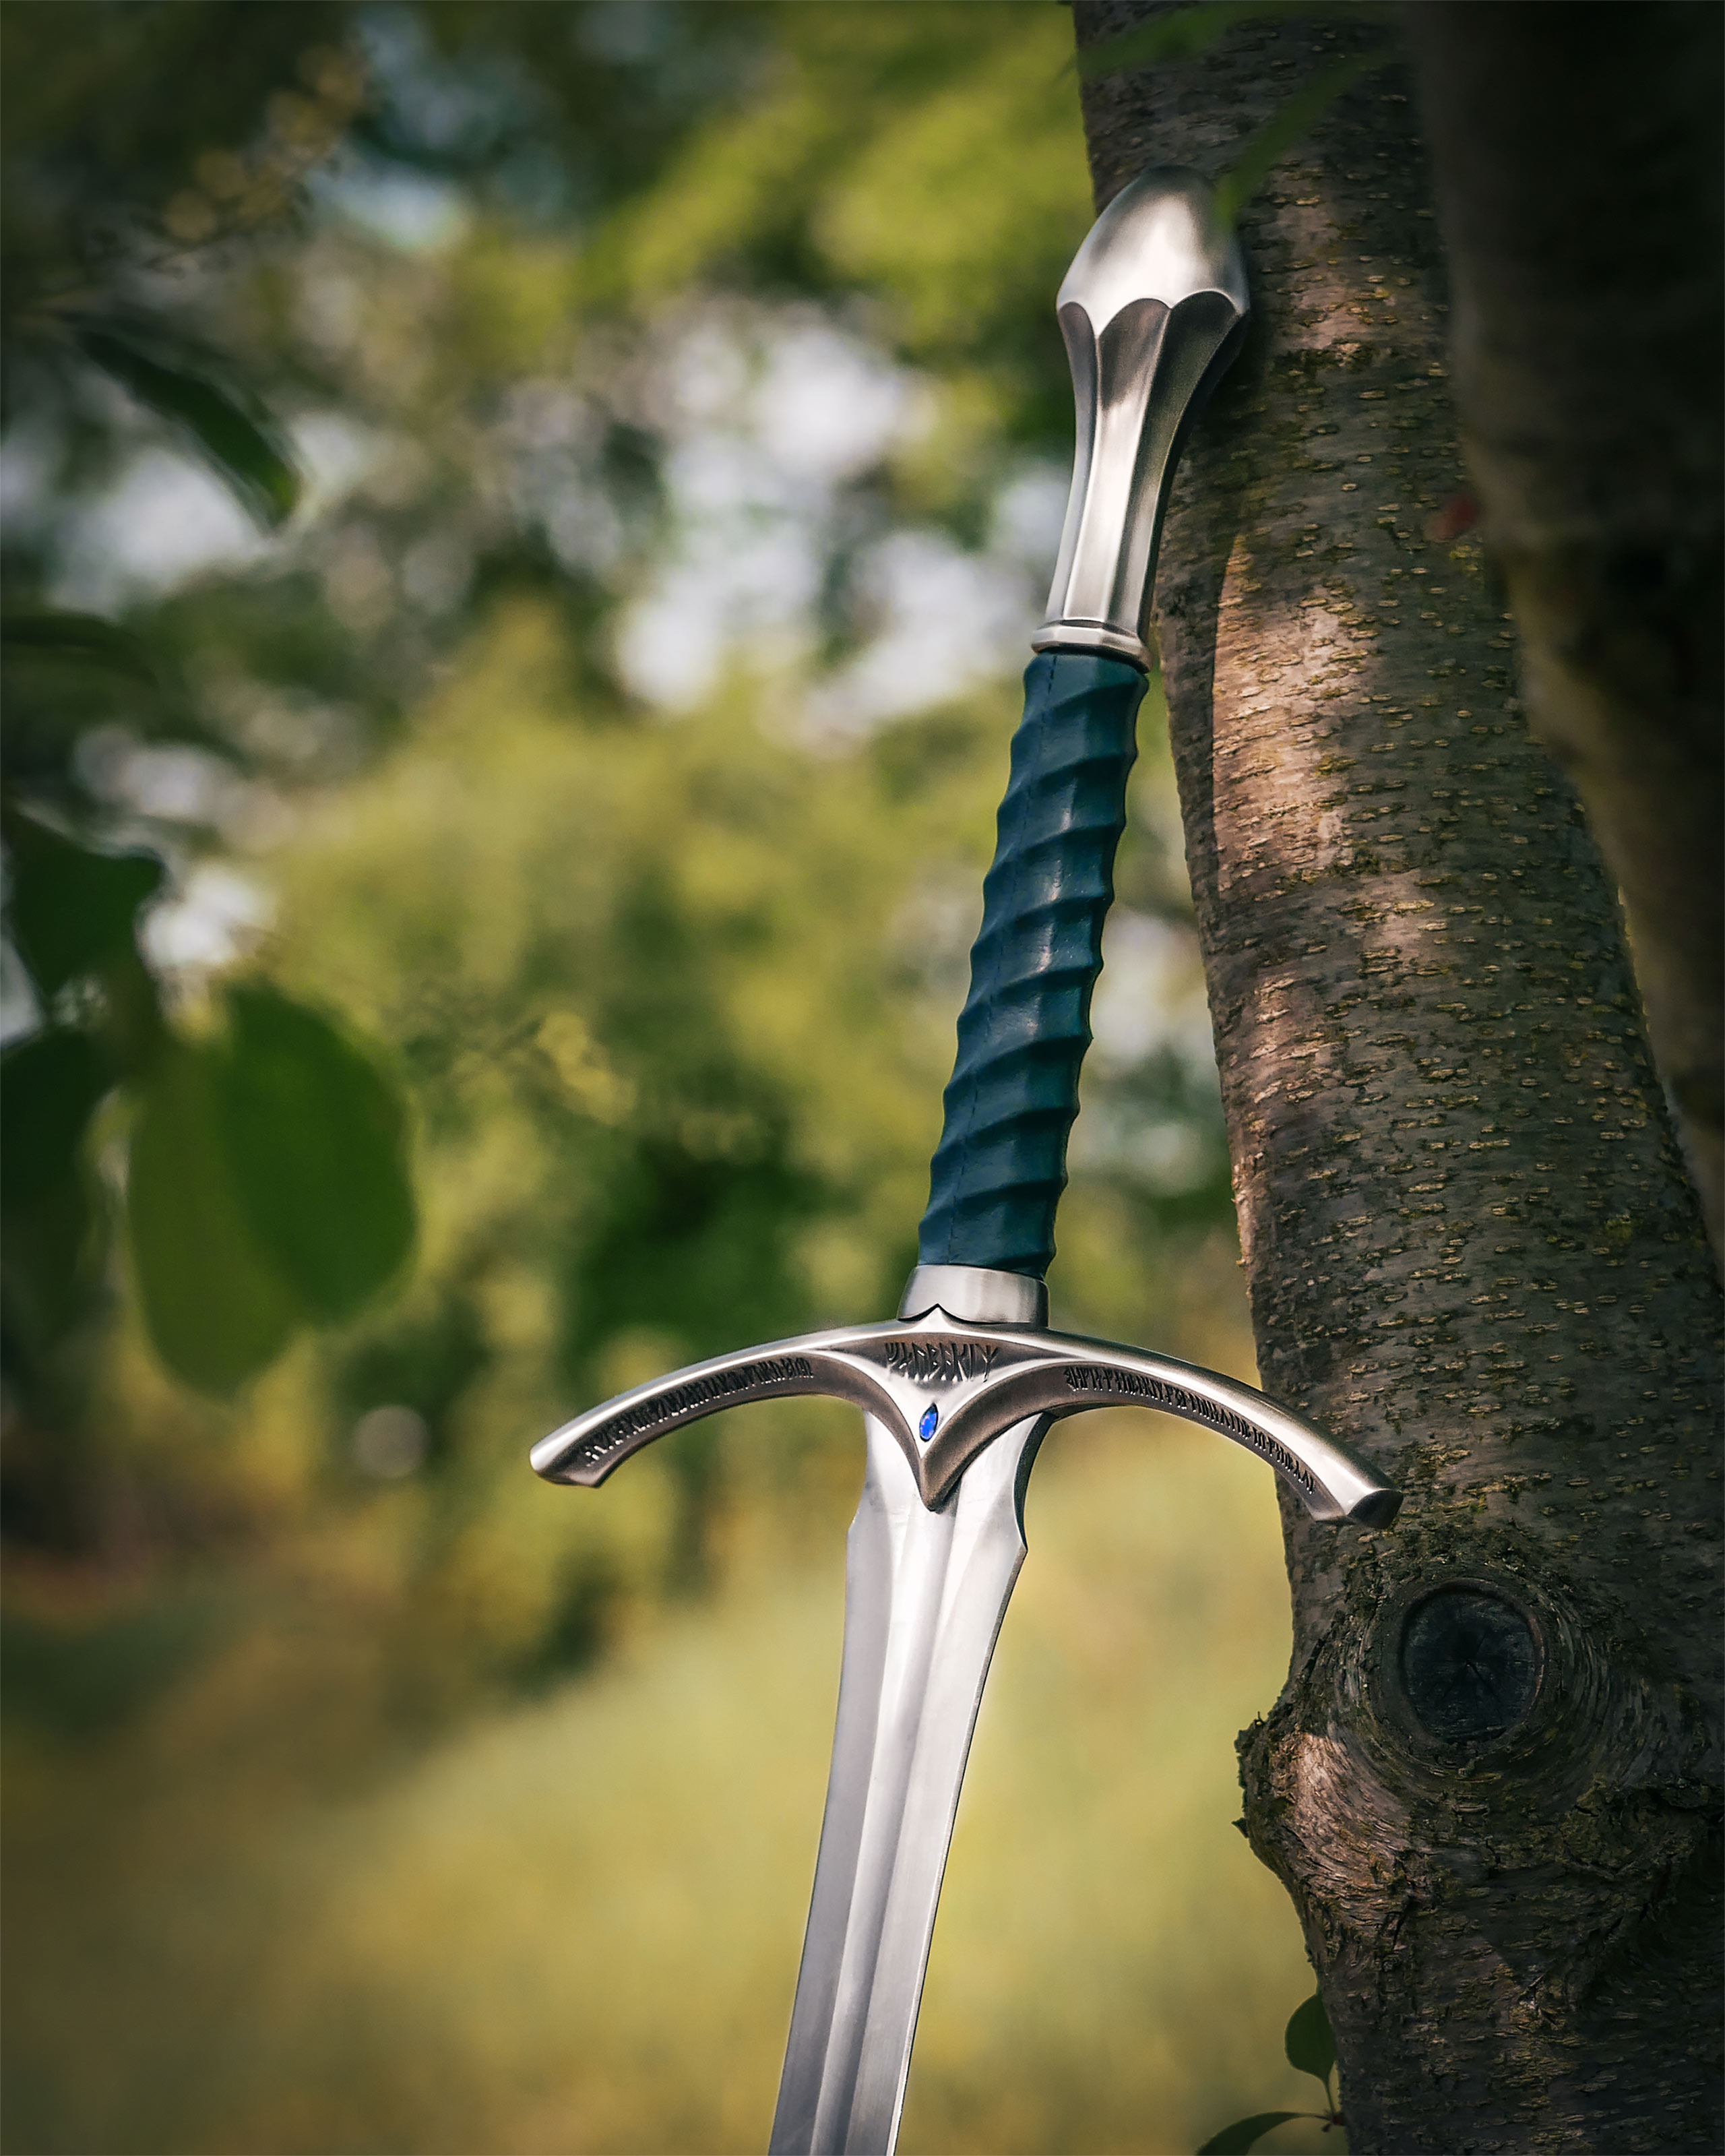 Gandalf's Glamdring Sword Replica - Lord of the Rings